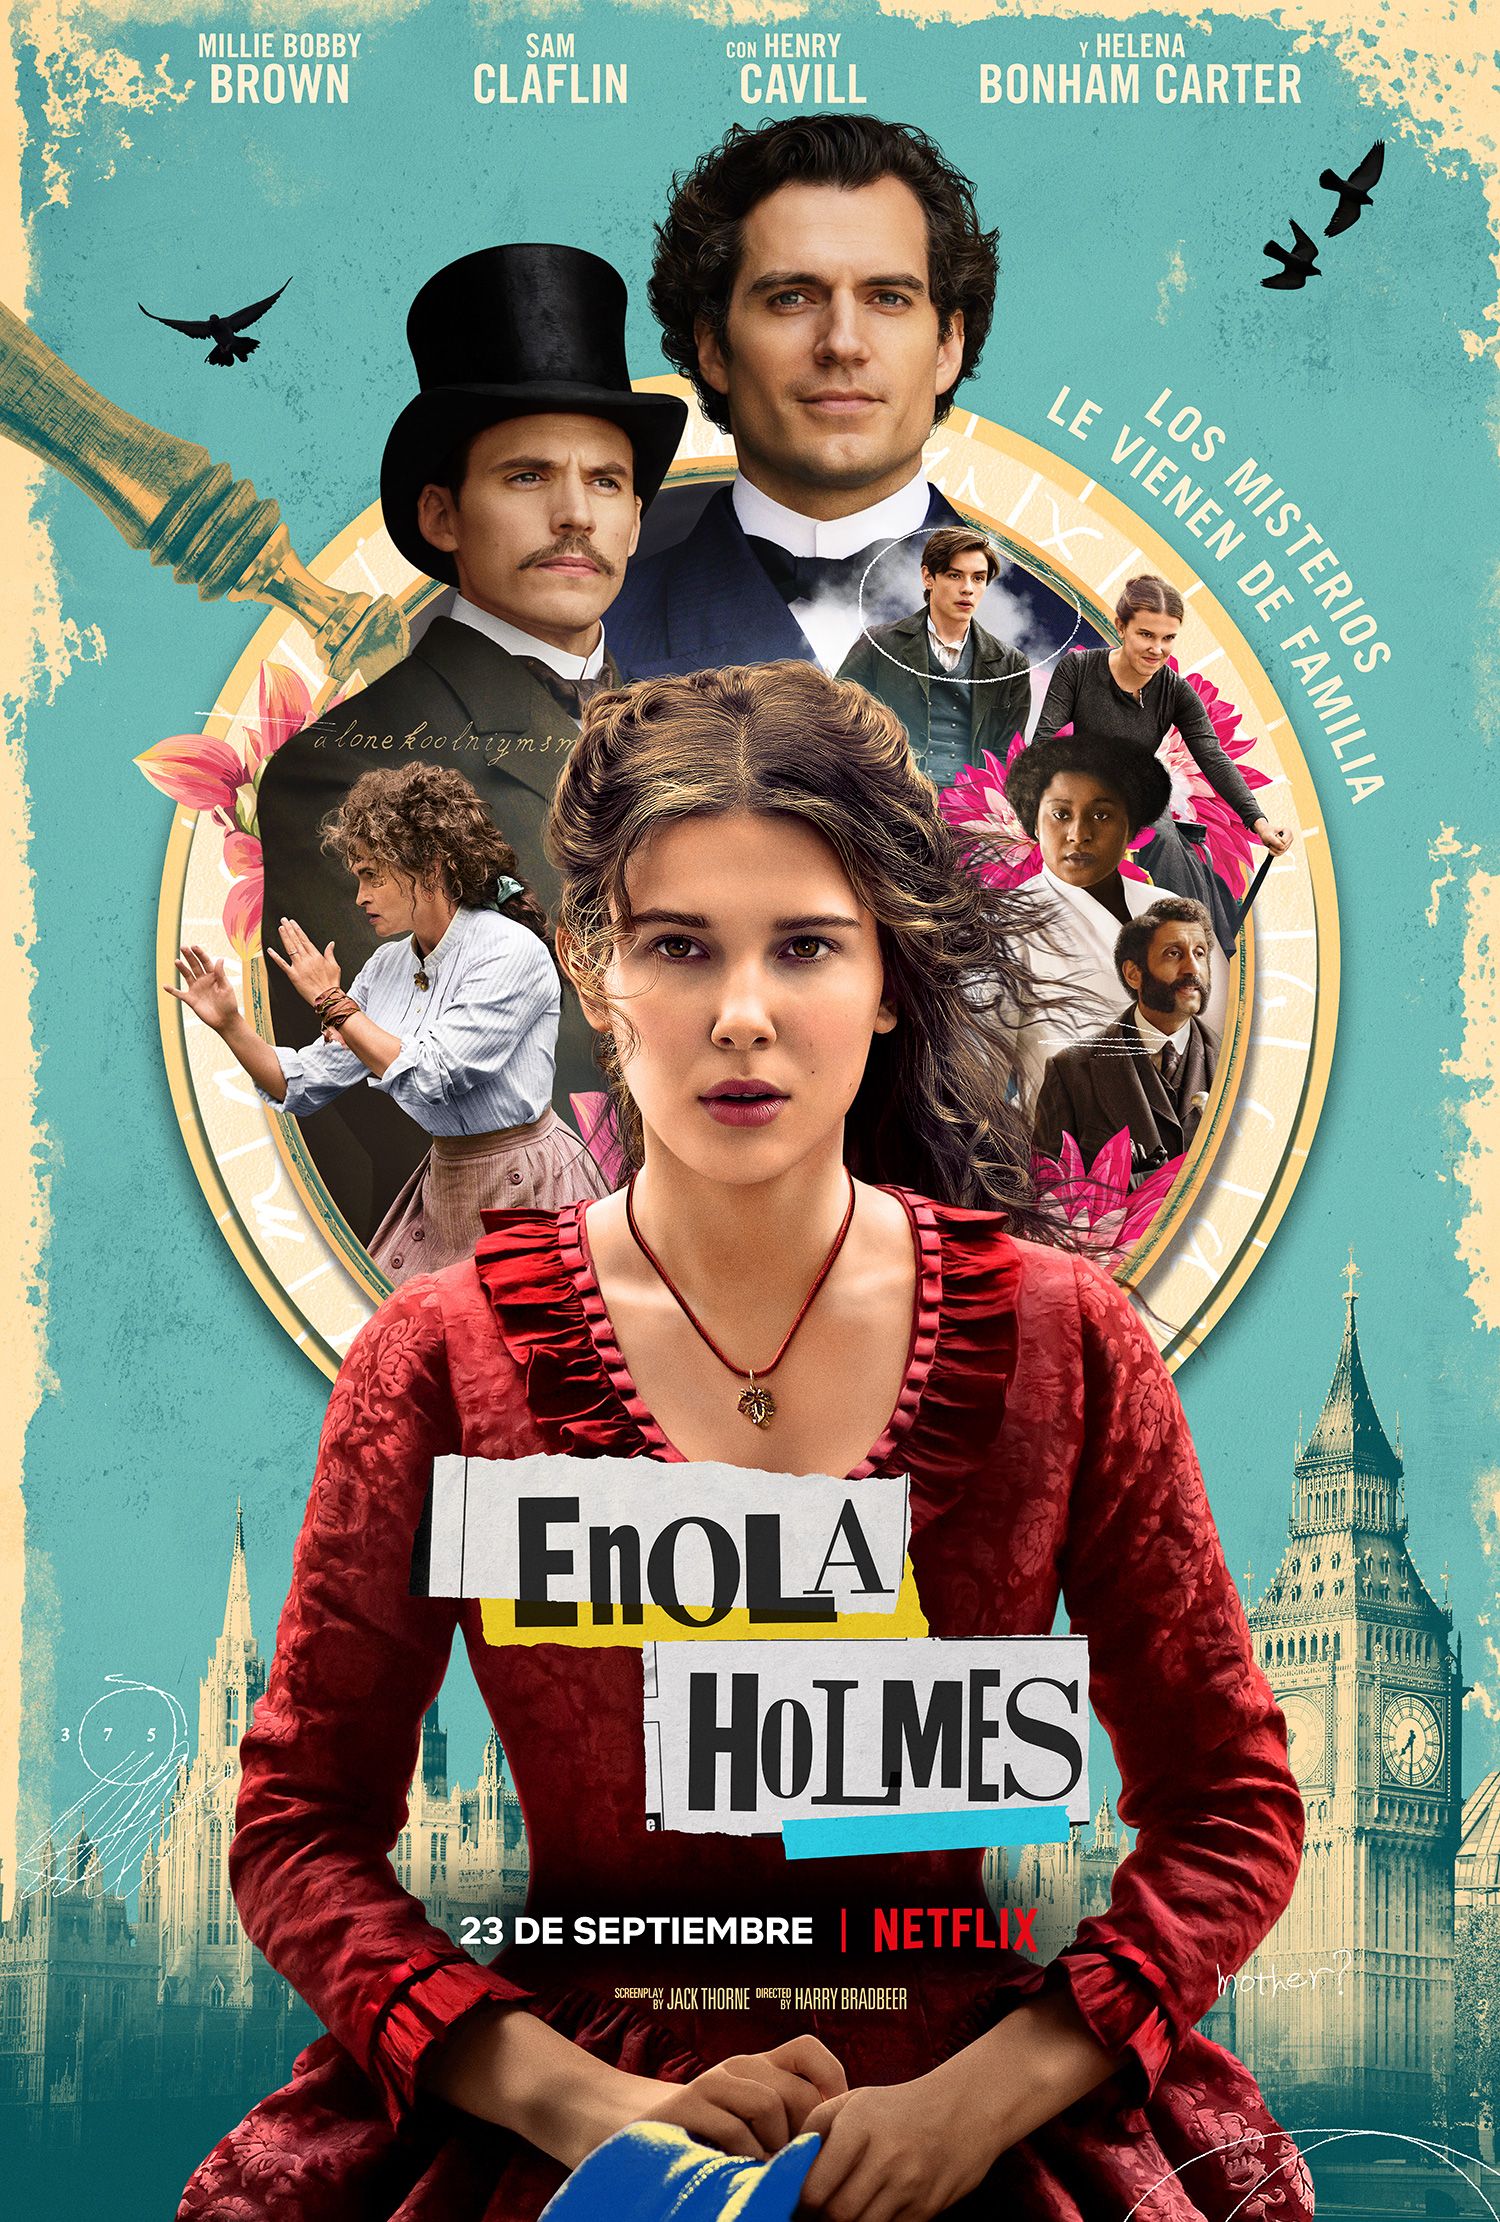 Enola Holmes Poster 3: Extra Large Poster Image